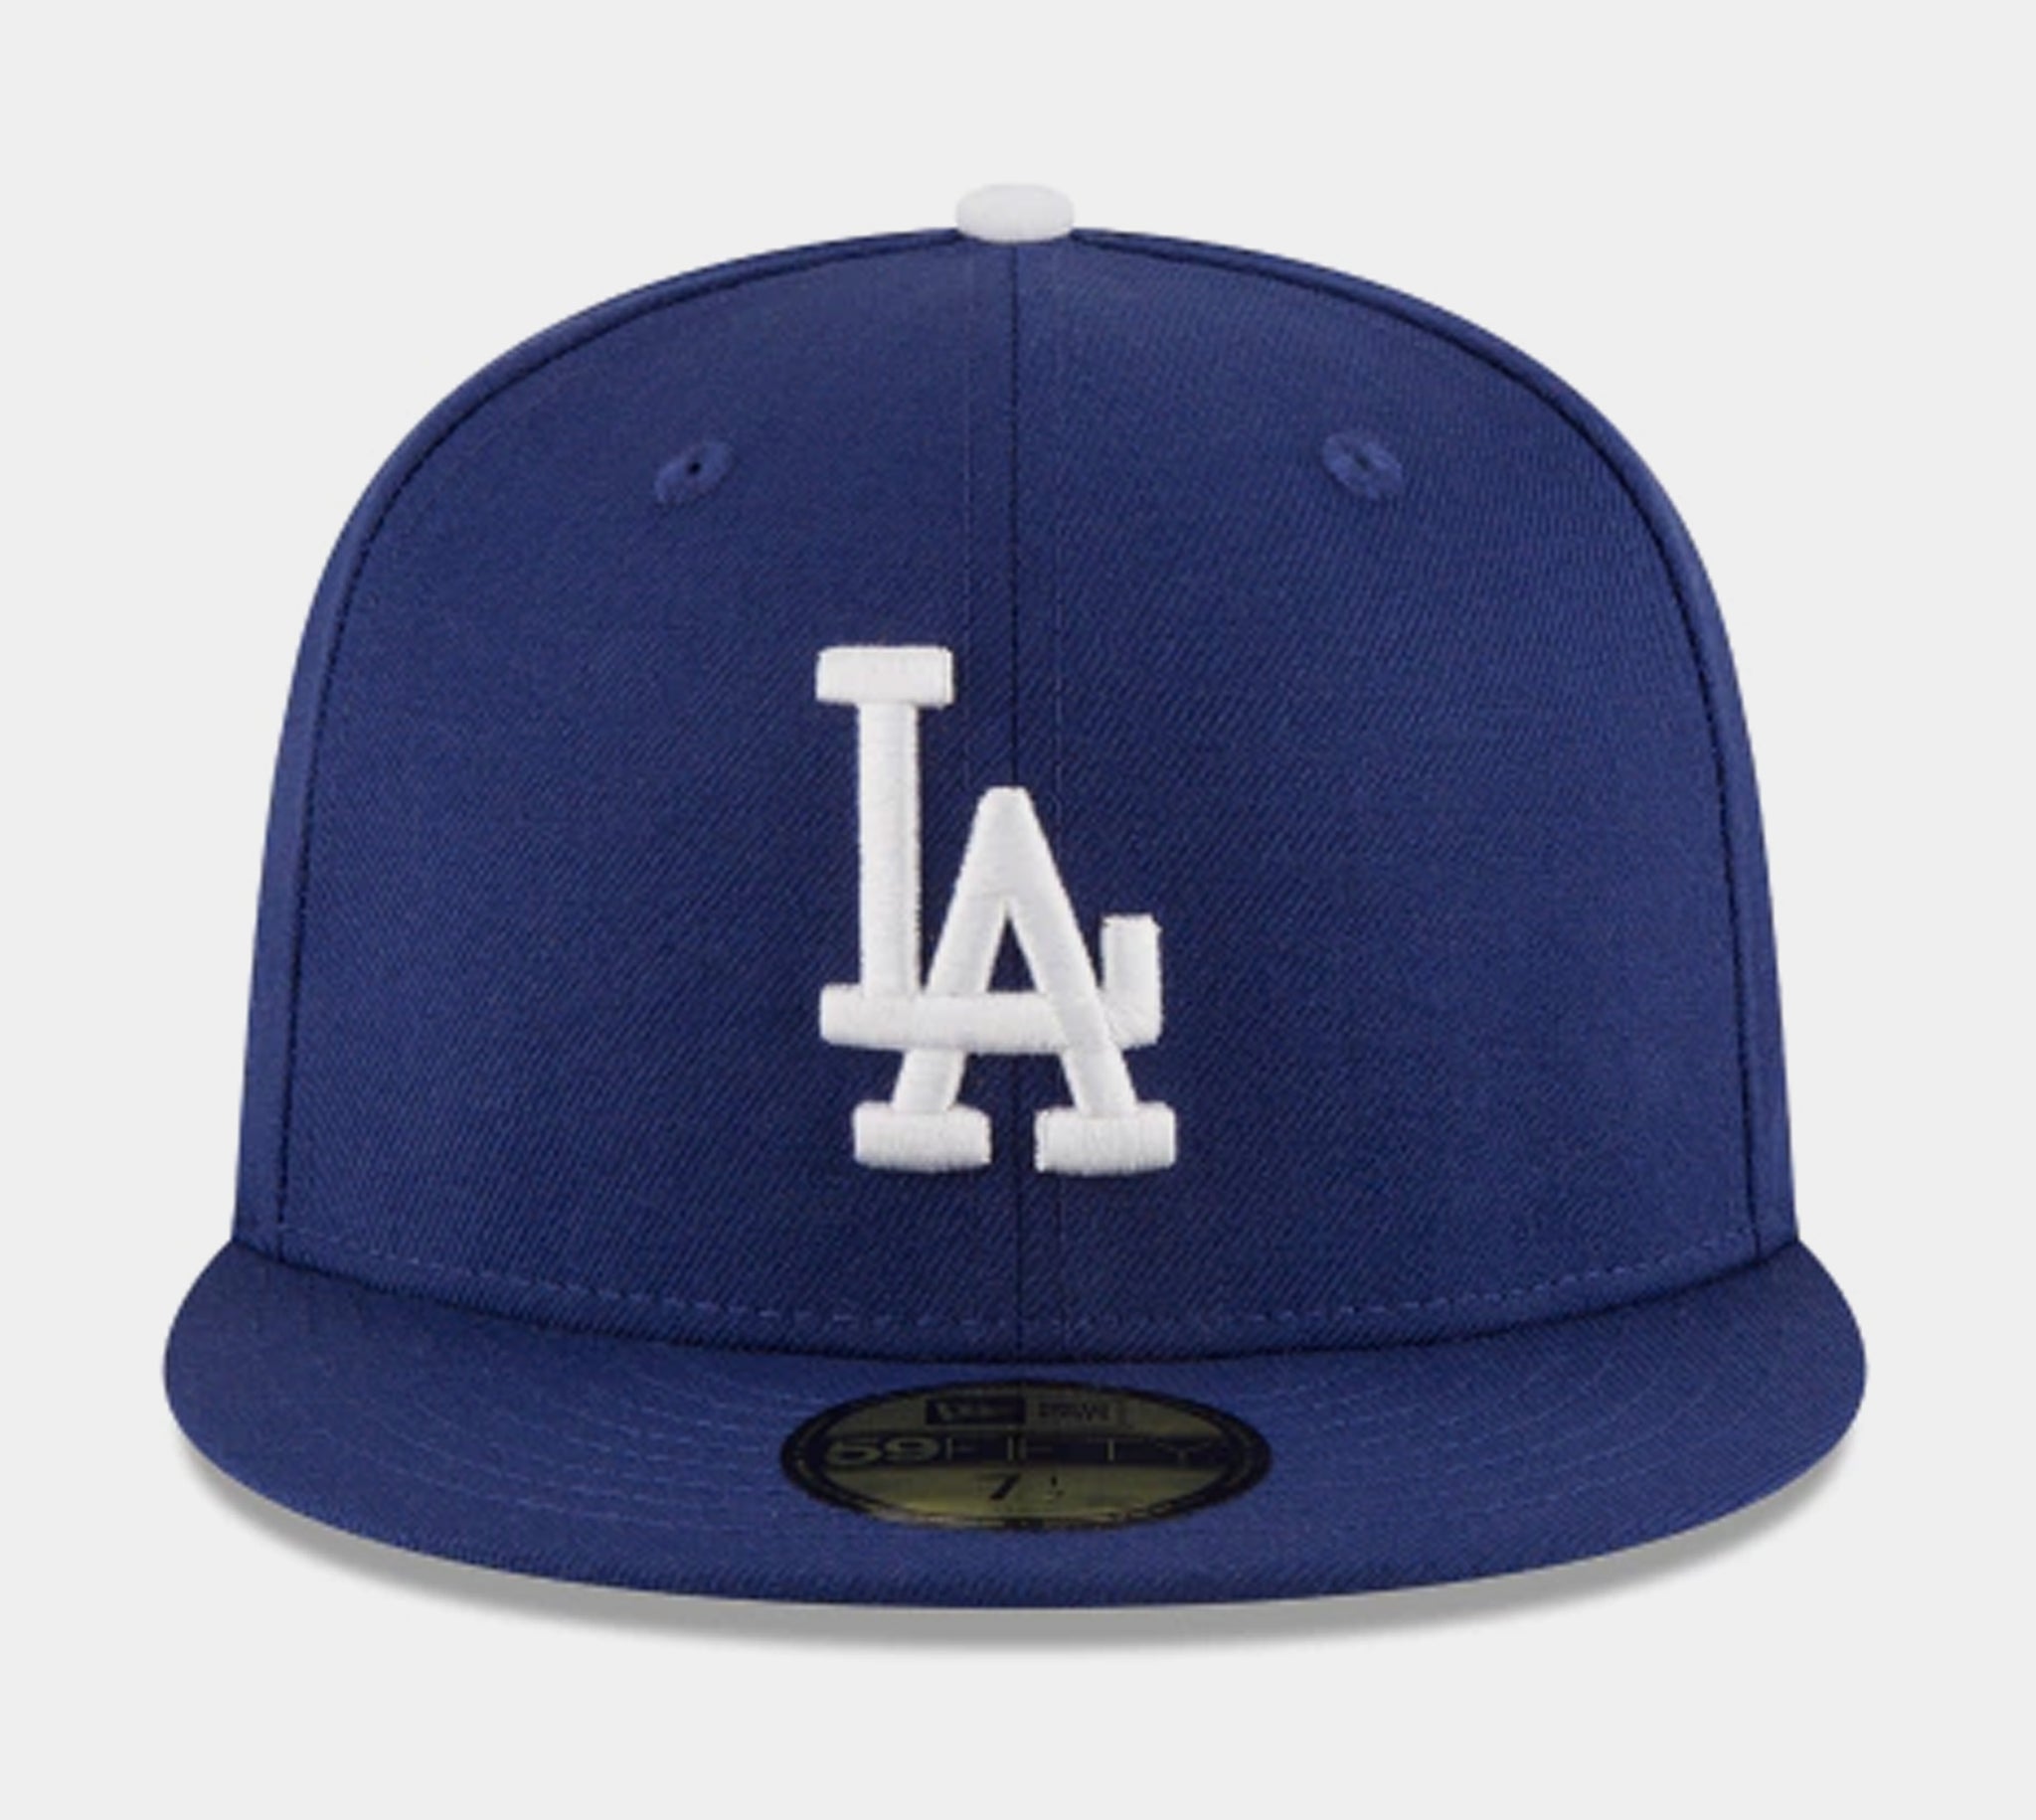 Off White Los Angeles Dodgers 1988 World Series Patch New Era Fitted 7